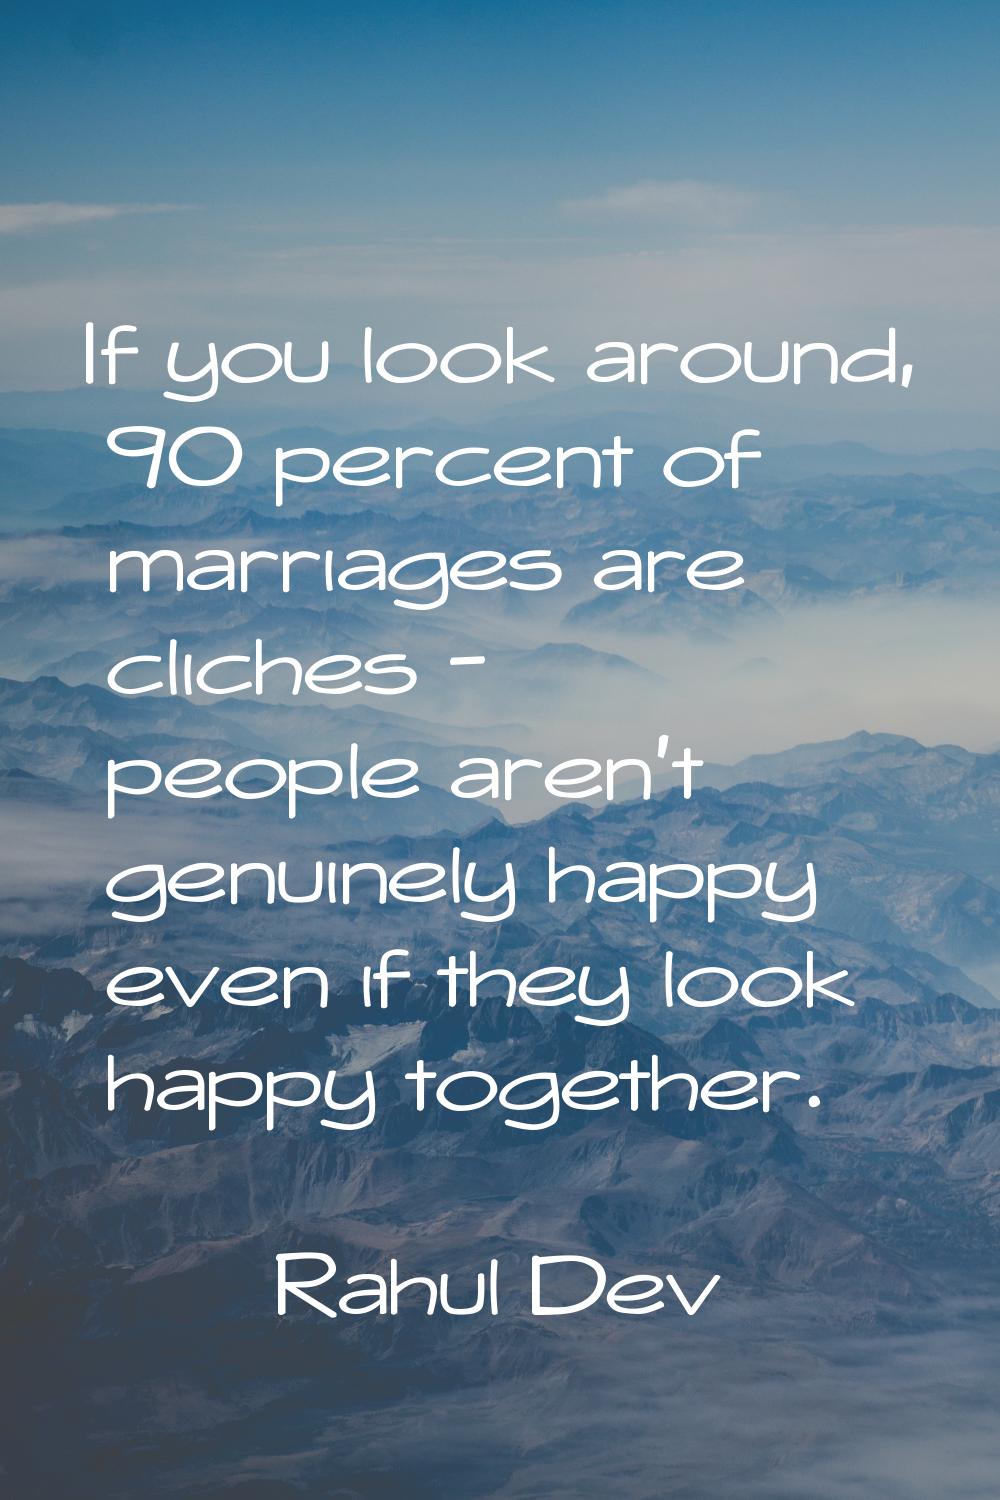 If you look around, 90 percent of marriages are cliches - people aren't genuinely happy even if the